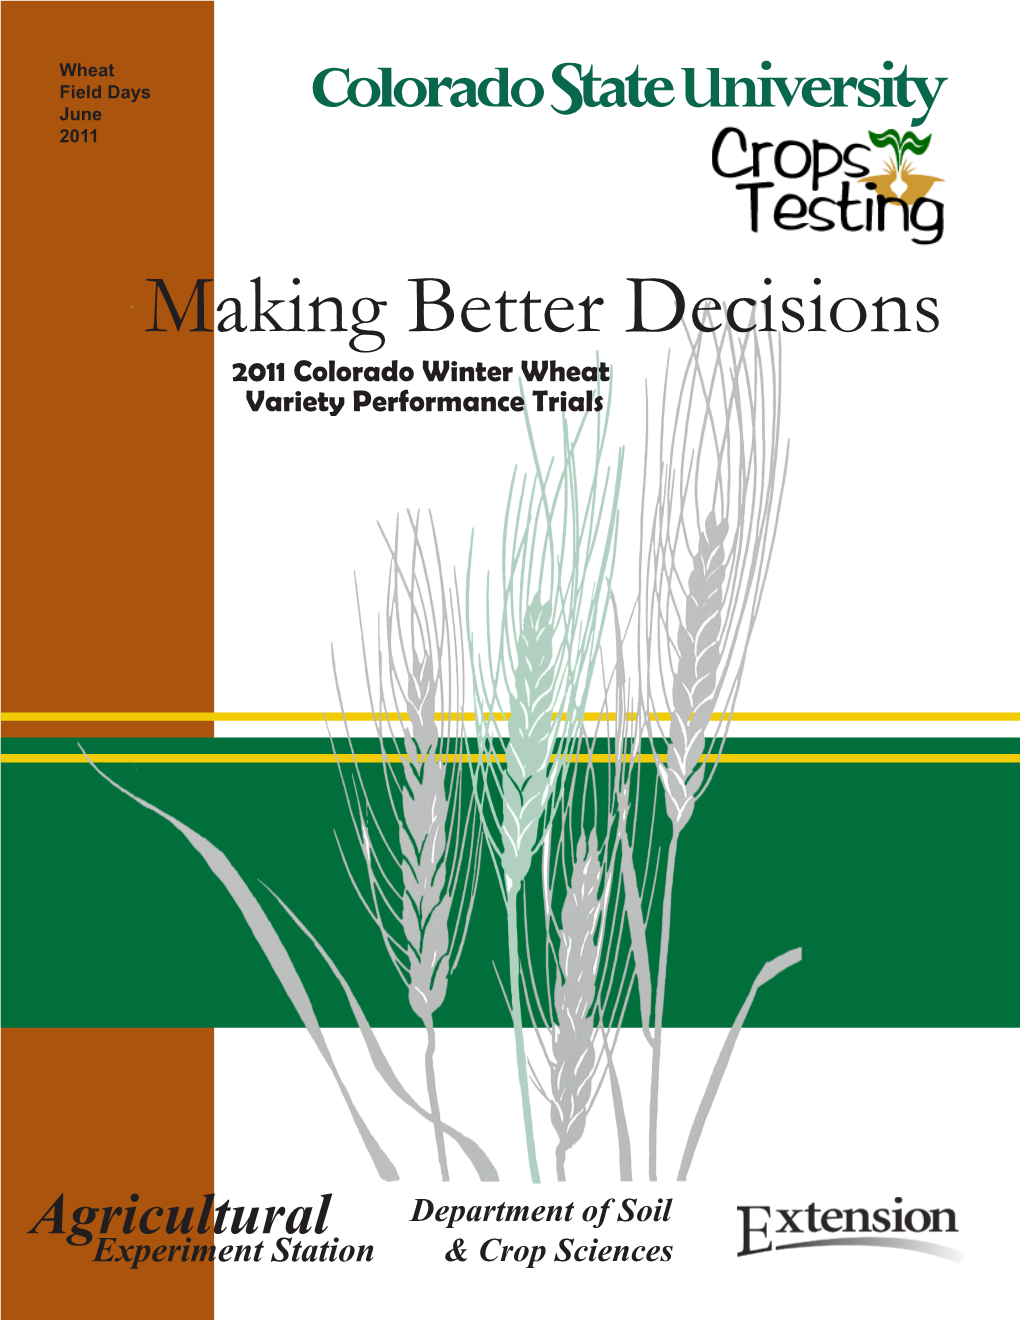 Making Better Decisions 2011 Colorado Winter Wheat Variety Performance Trials